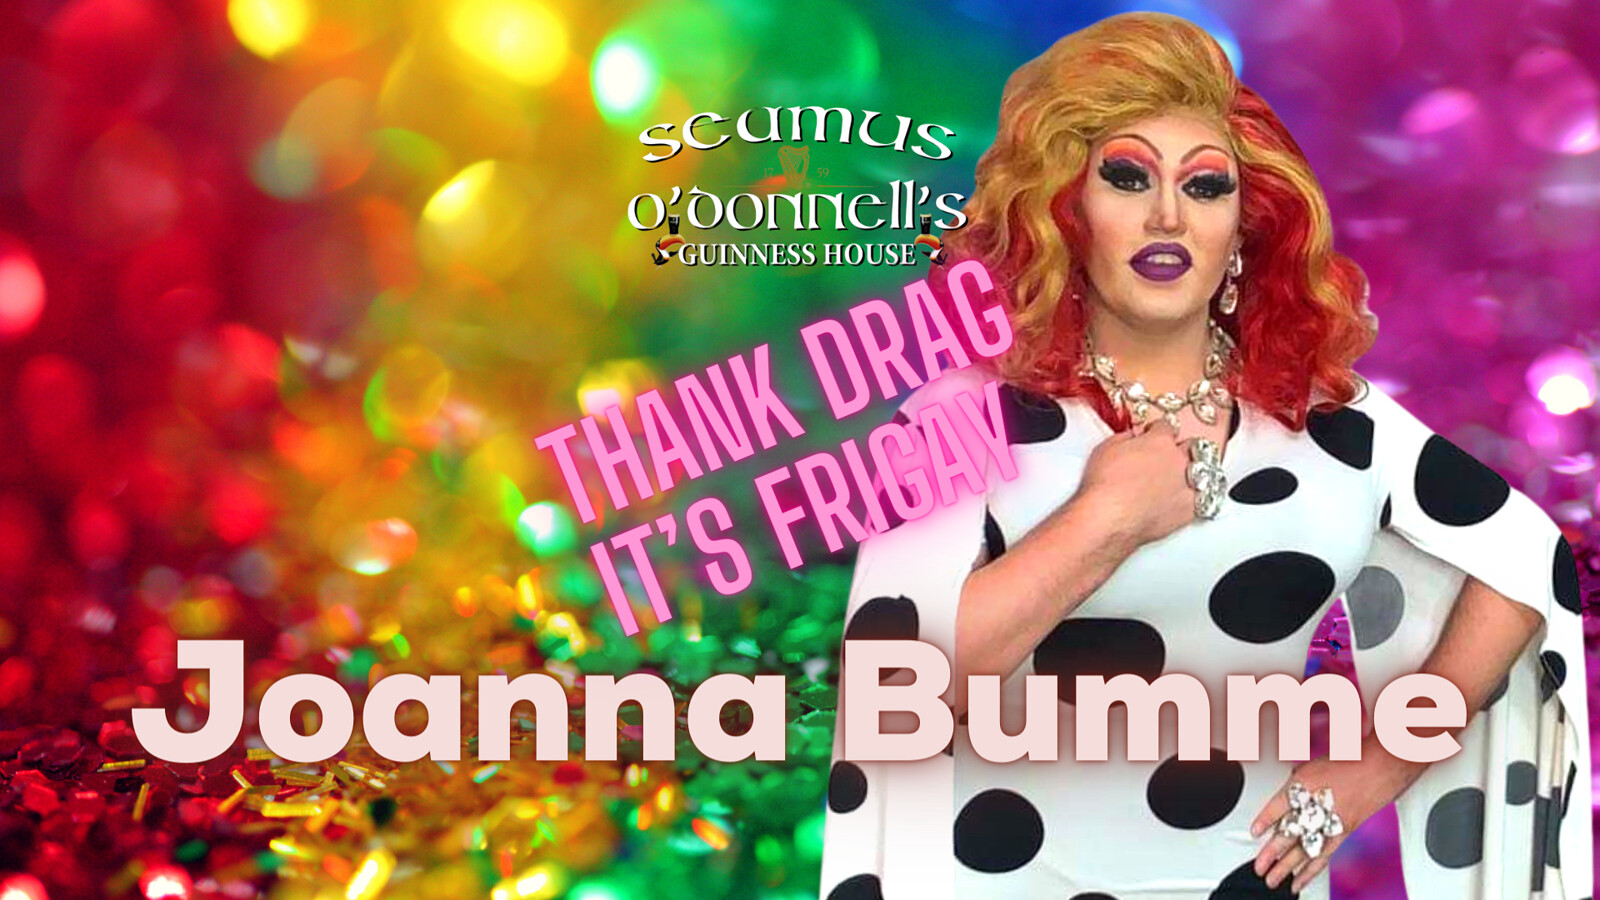 Thank Drag It's FriGay with Joanne Bumme at Seamus O'Donnell's